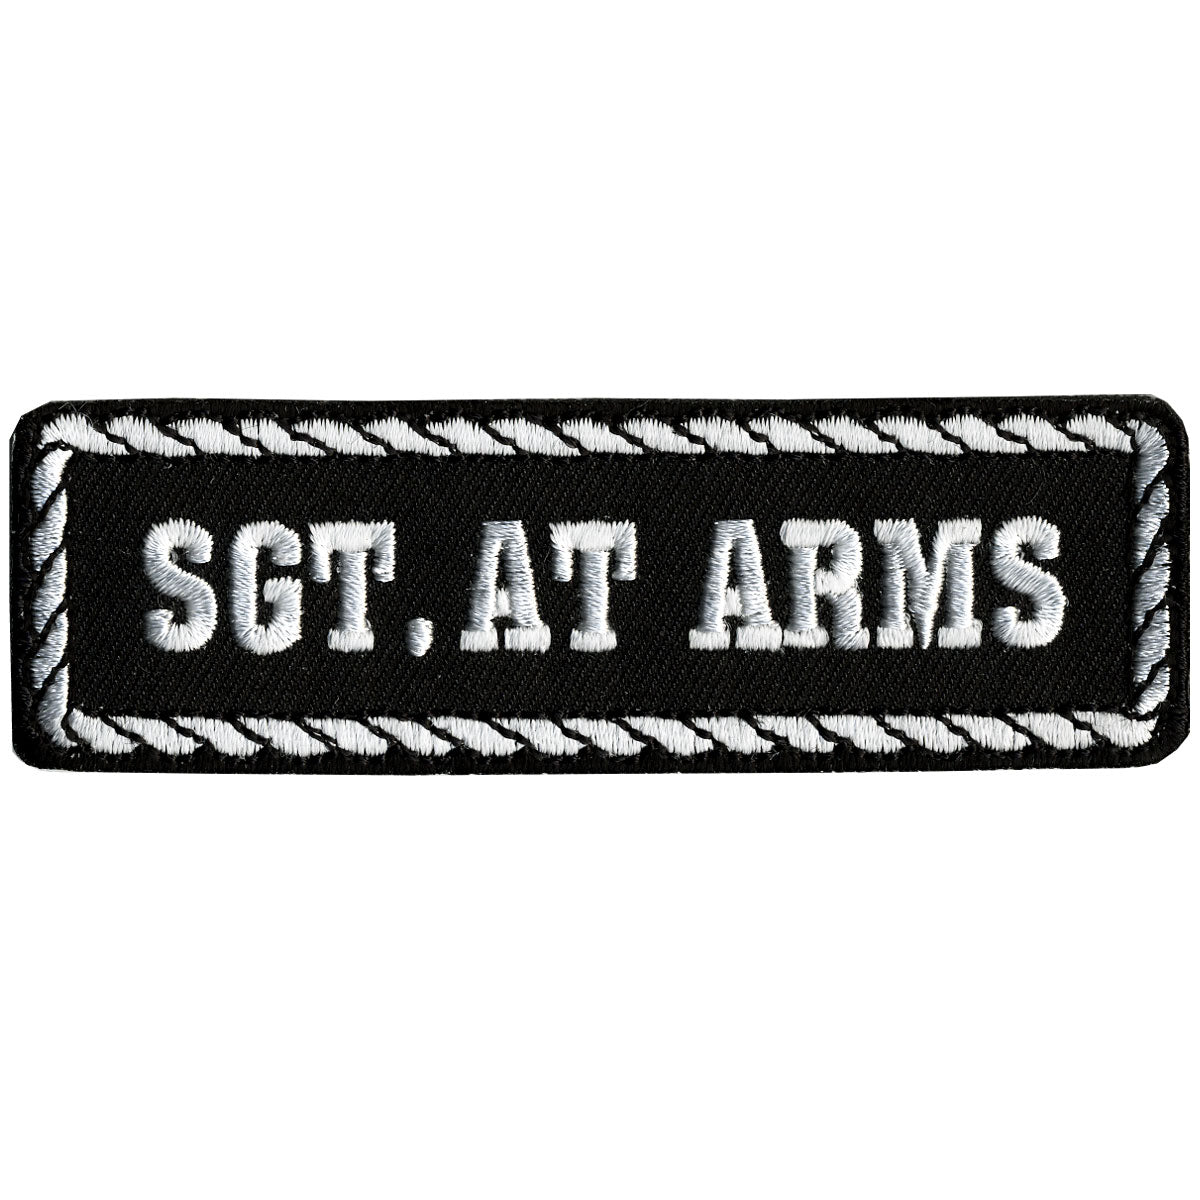 Hot Leathers PPD1005 Sgt. At Arms 4" x 1" Patch